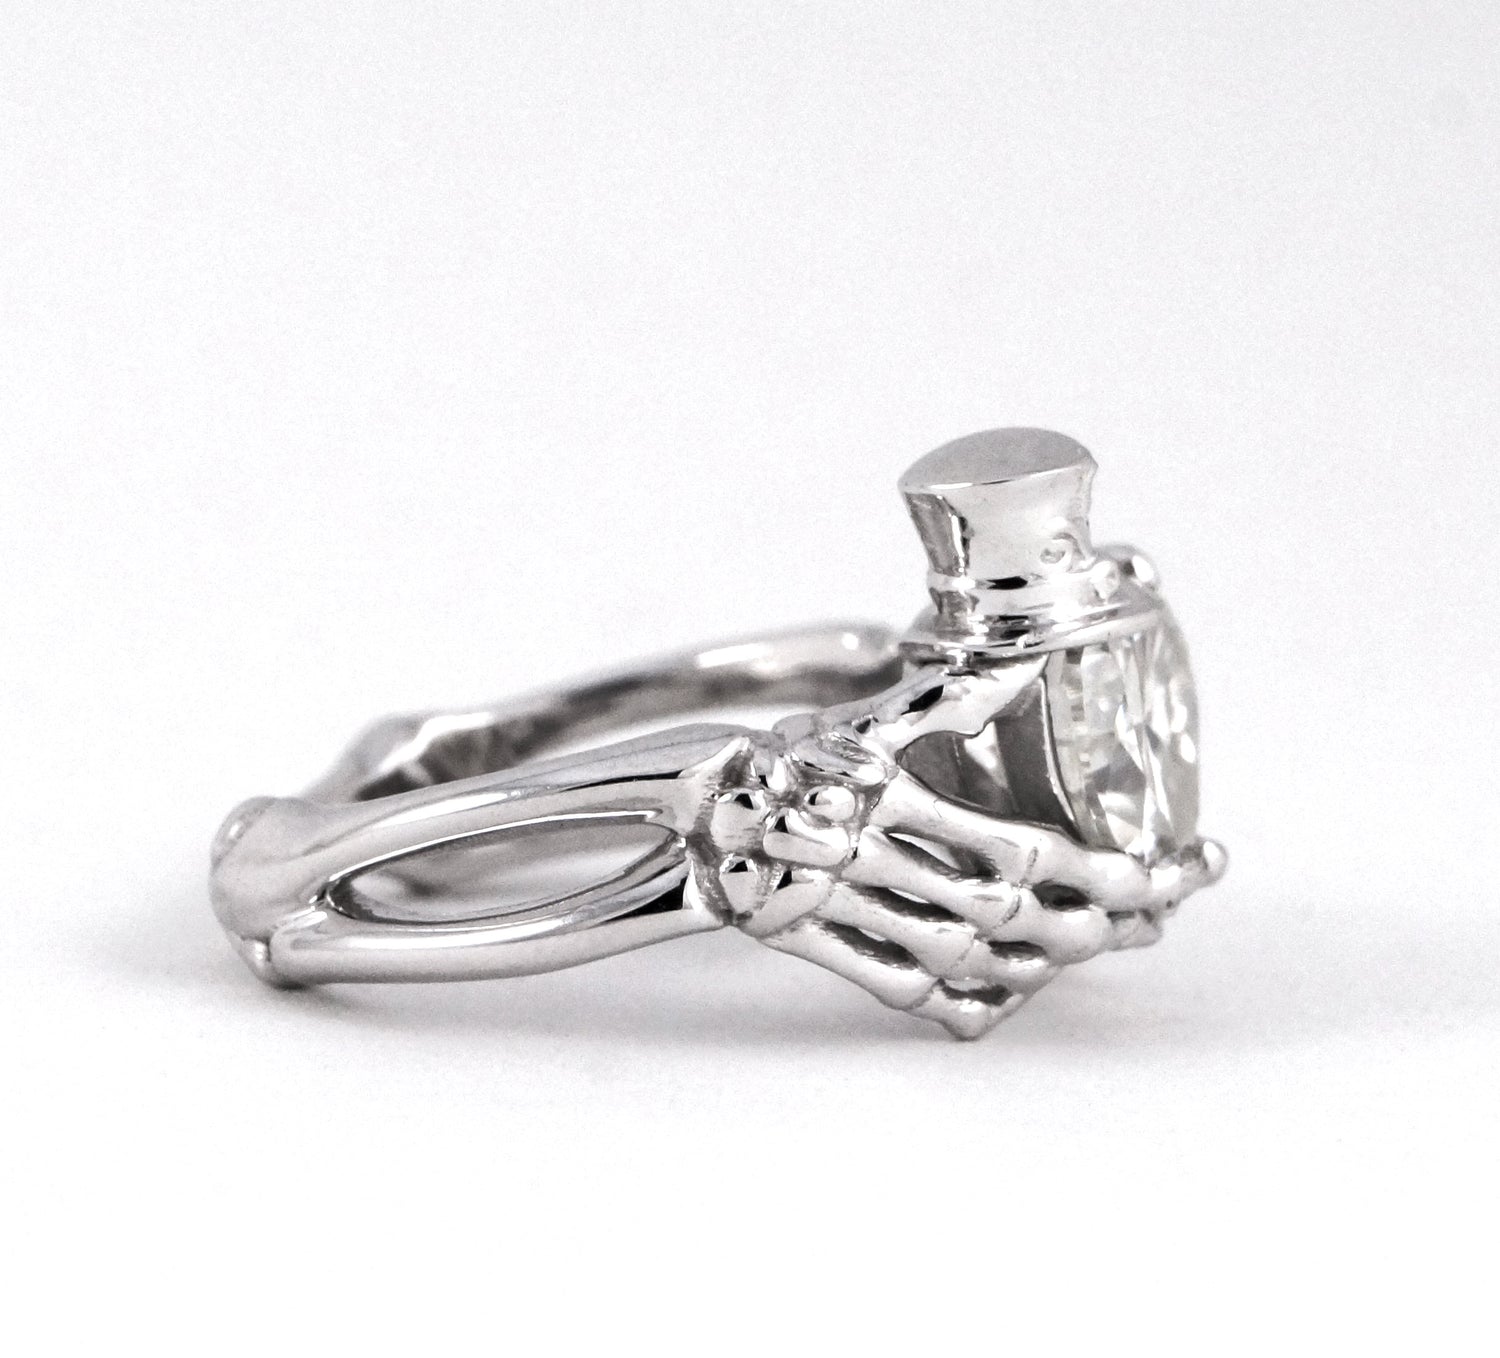 Skeleton Claddagh with Top Hat Jack Skellington Inspired Engagement Ring Heart Diamond Moissanite CZ Sterling Silver White Gold Fine Jewelry